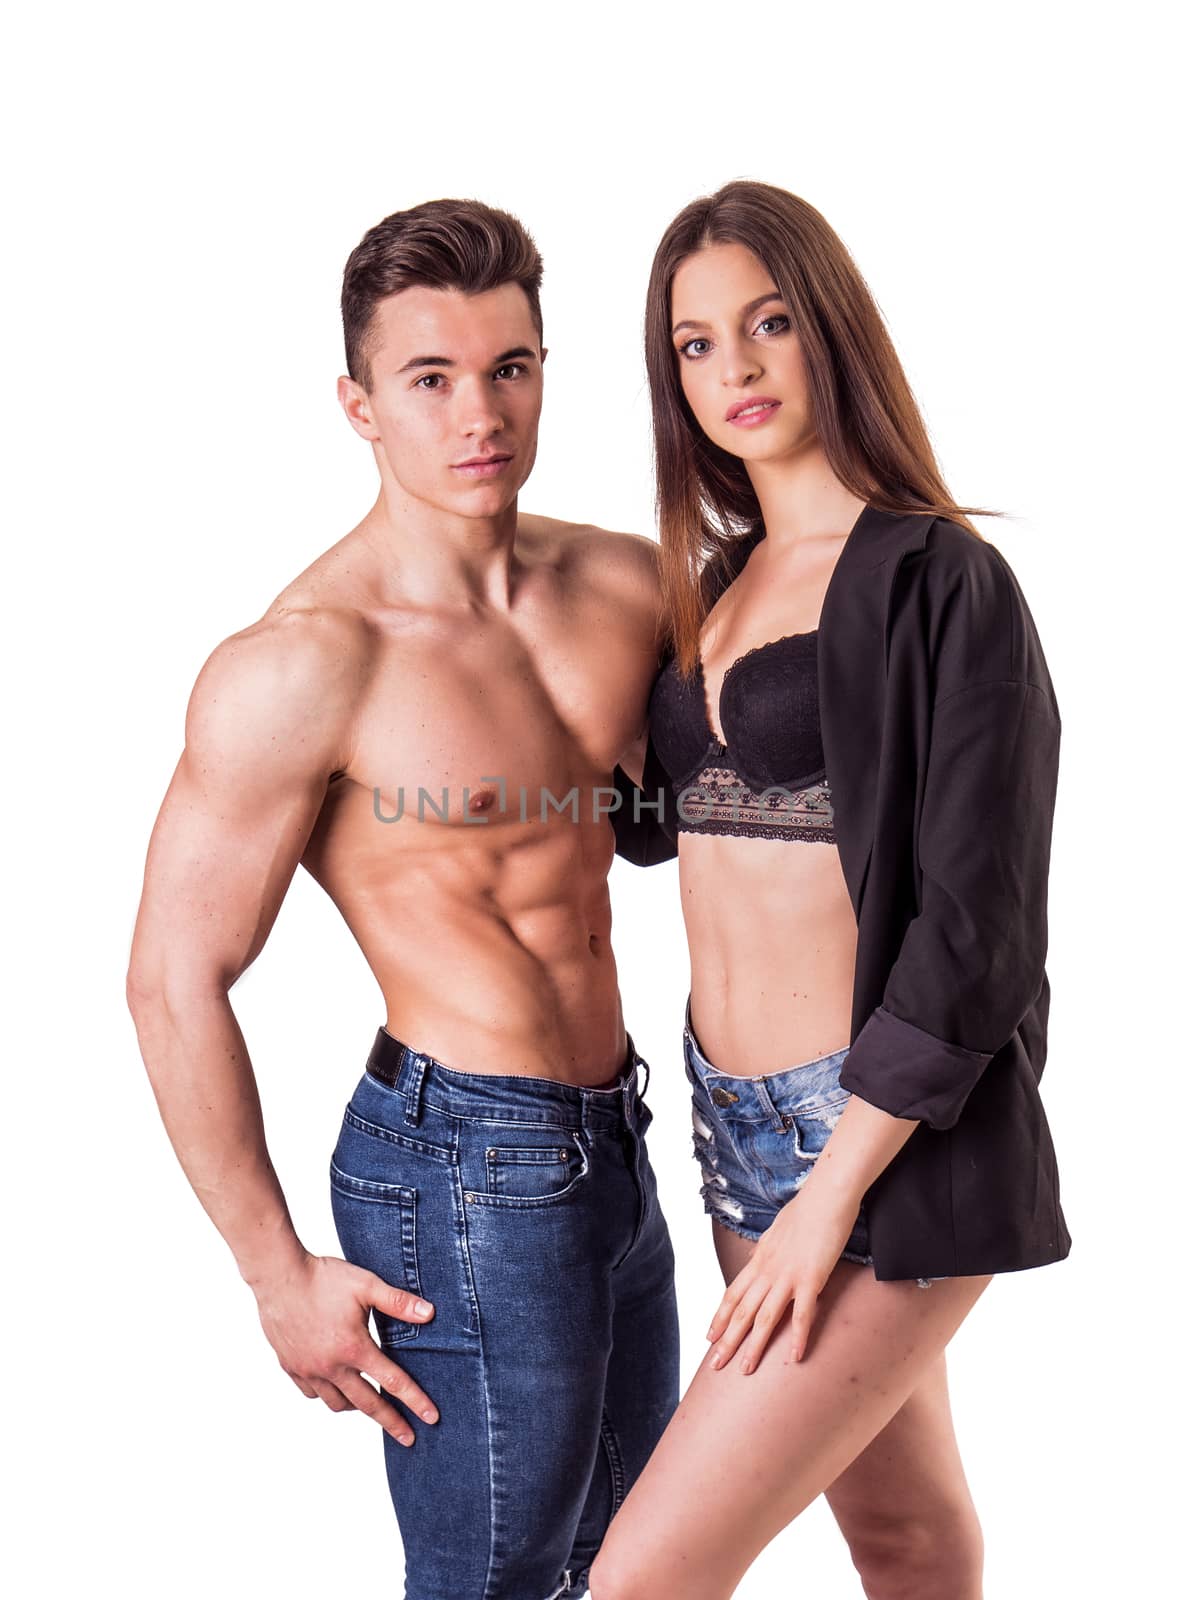 Romantic couple embracing in studio shot, man is muscular and shirtless, woman is showing bra under open shirt, both looking at camera